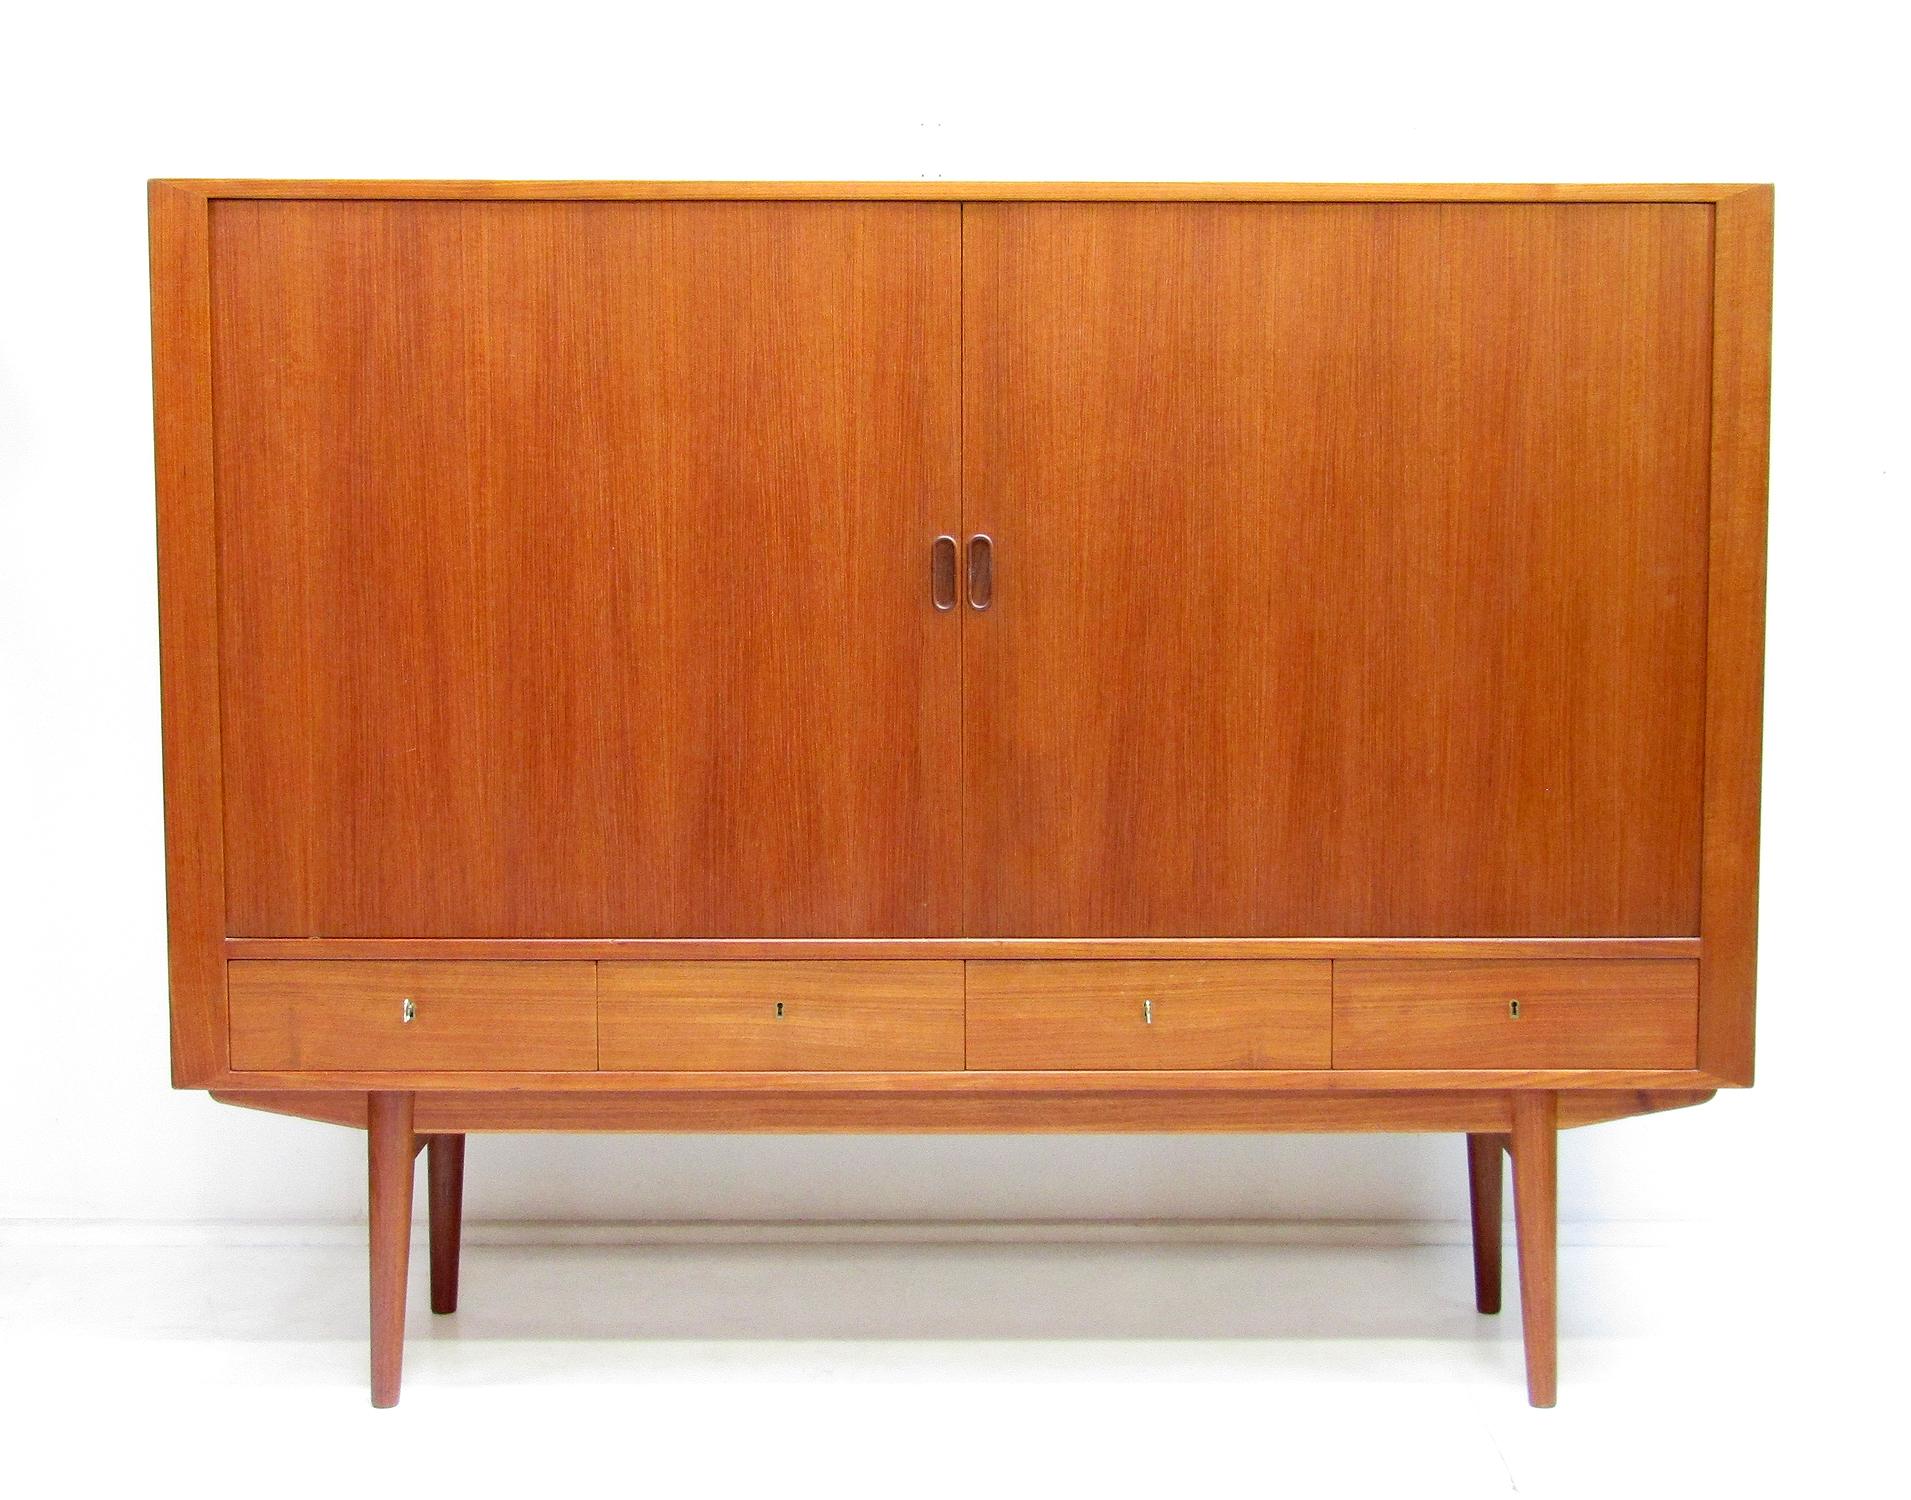 A sleek 1960s highboard in warm teak by Arne Vodder for Sibast.

With sliding tambour doors, tapered legs, copious storage and perfect proportions it is both visually arresting and extremely useful.

The Sibast label is affixed to the rear.

The